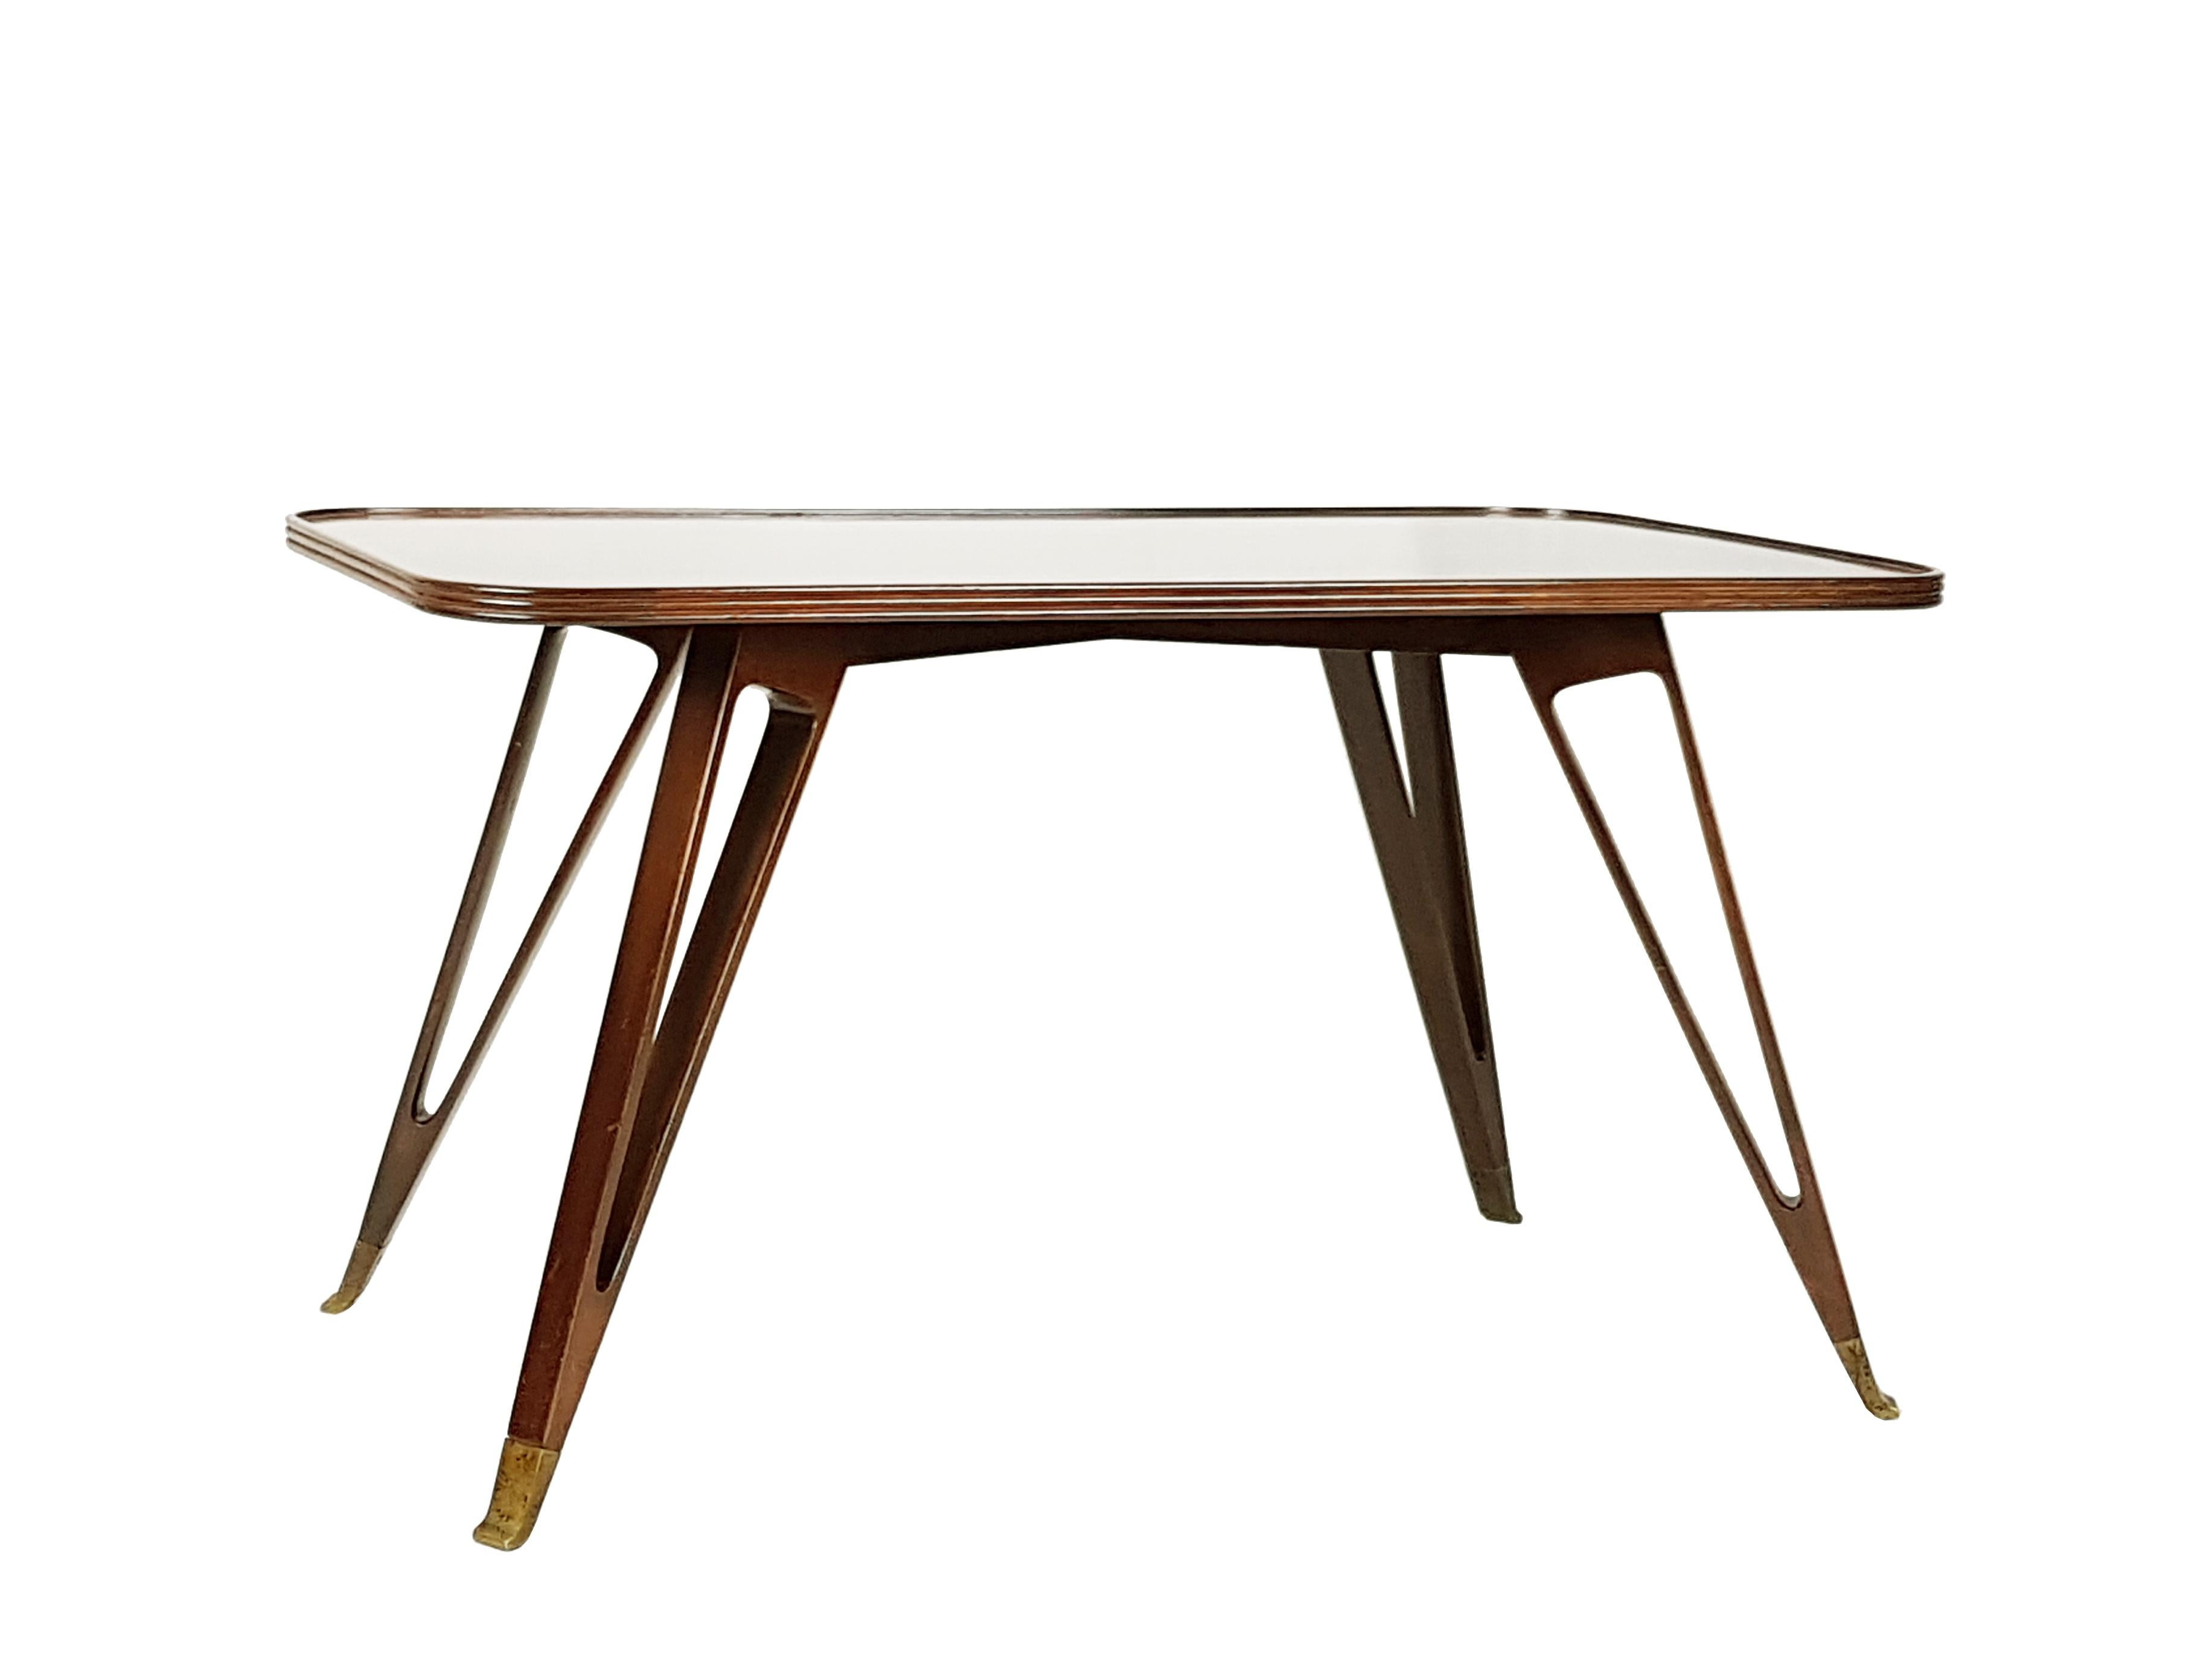 Italian Wood & Brass Mid-Century Modern Coffee Table Attrib. to Paolo Buffa In Good Condition For Sale In Varese, Lombardia